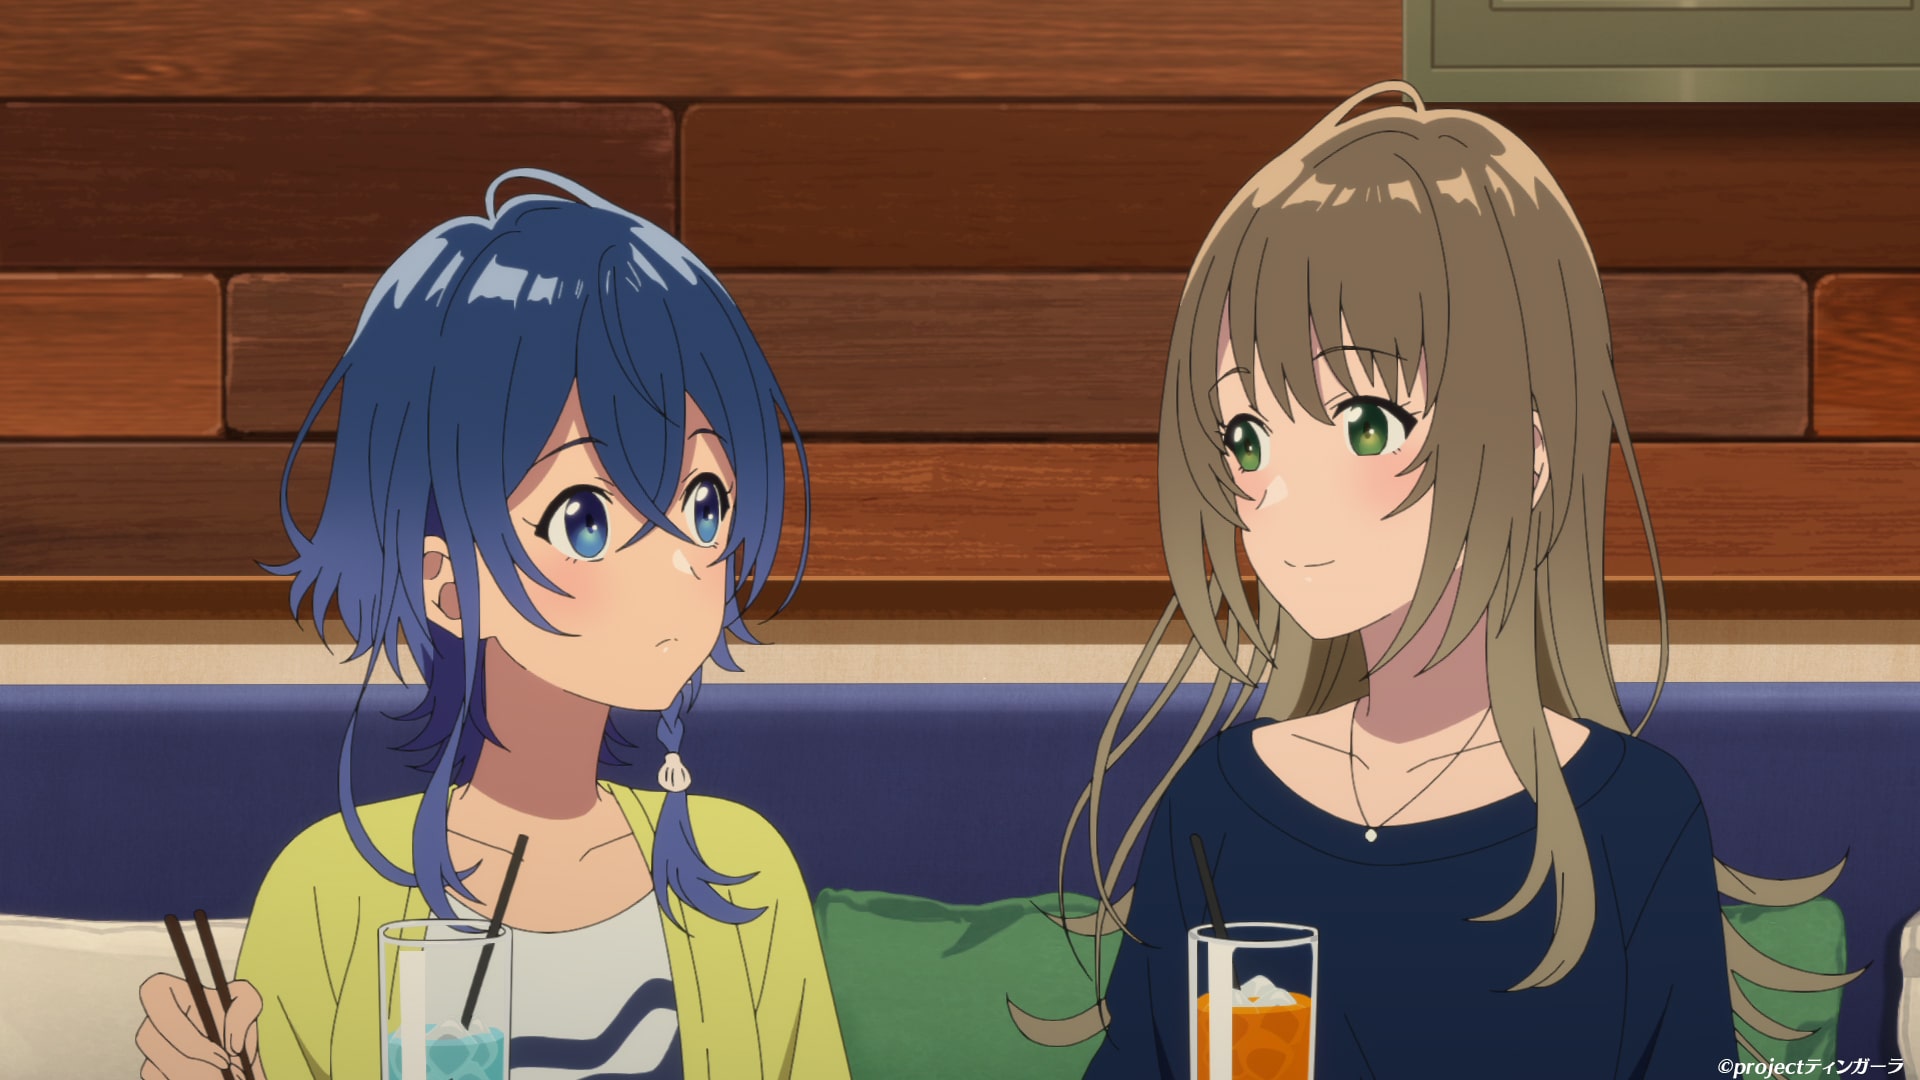 Kukuru is feeling down about her new job that hasn't been going well, when  a voice calls out to her. Fuuka has returned to Okinawa. TV anime The  Aquatope on White Sand